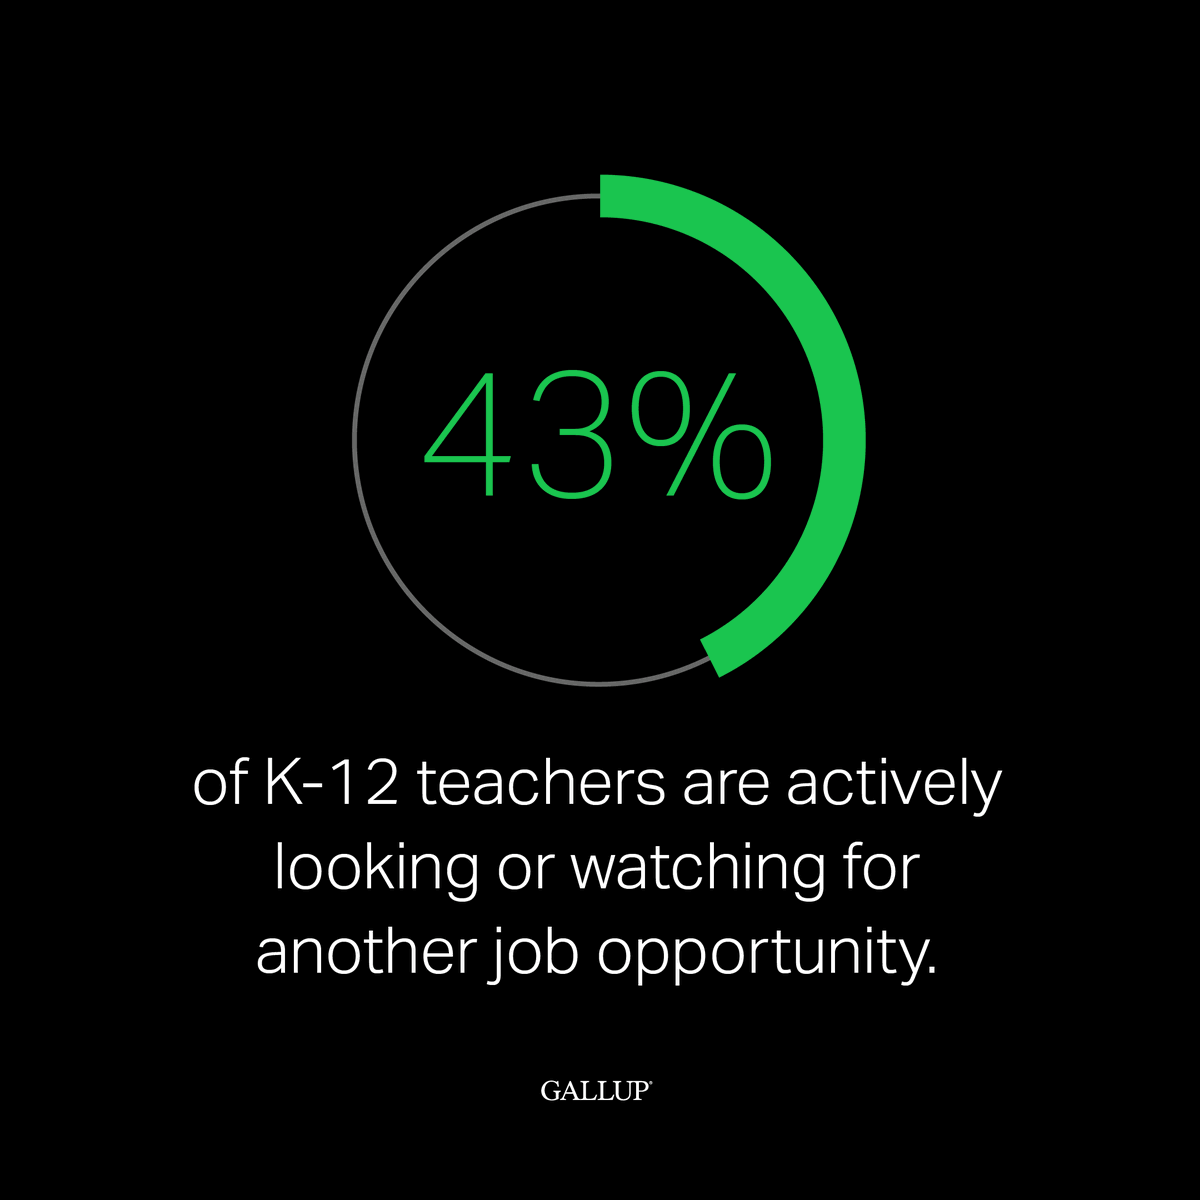 The job description of a K-12 educator has been widely disrupted by new expectations, evolving resource needs and changing technology. While teaching has always been a demanding profession, recent changes have made it even more difficult and stressful. on.gallup.com/3JmGtpH